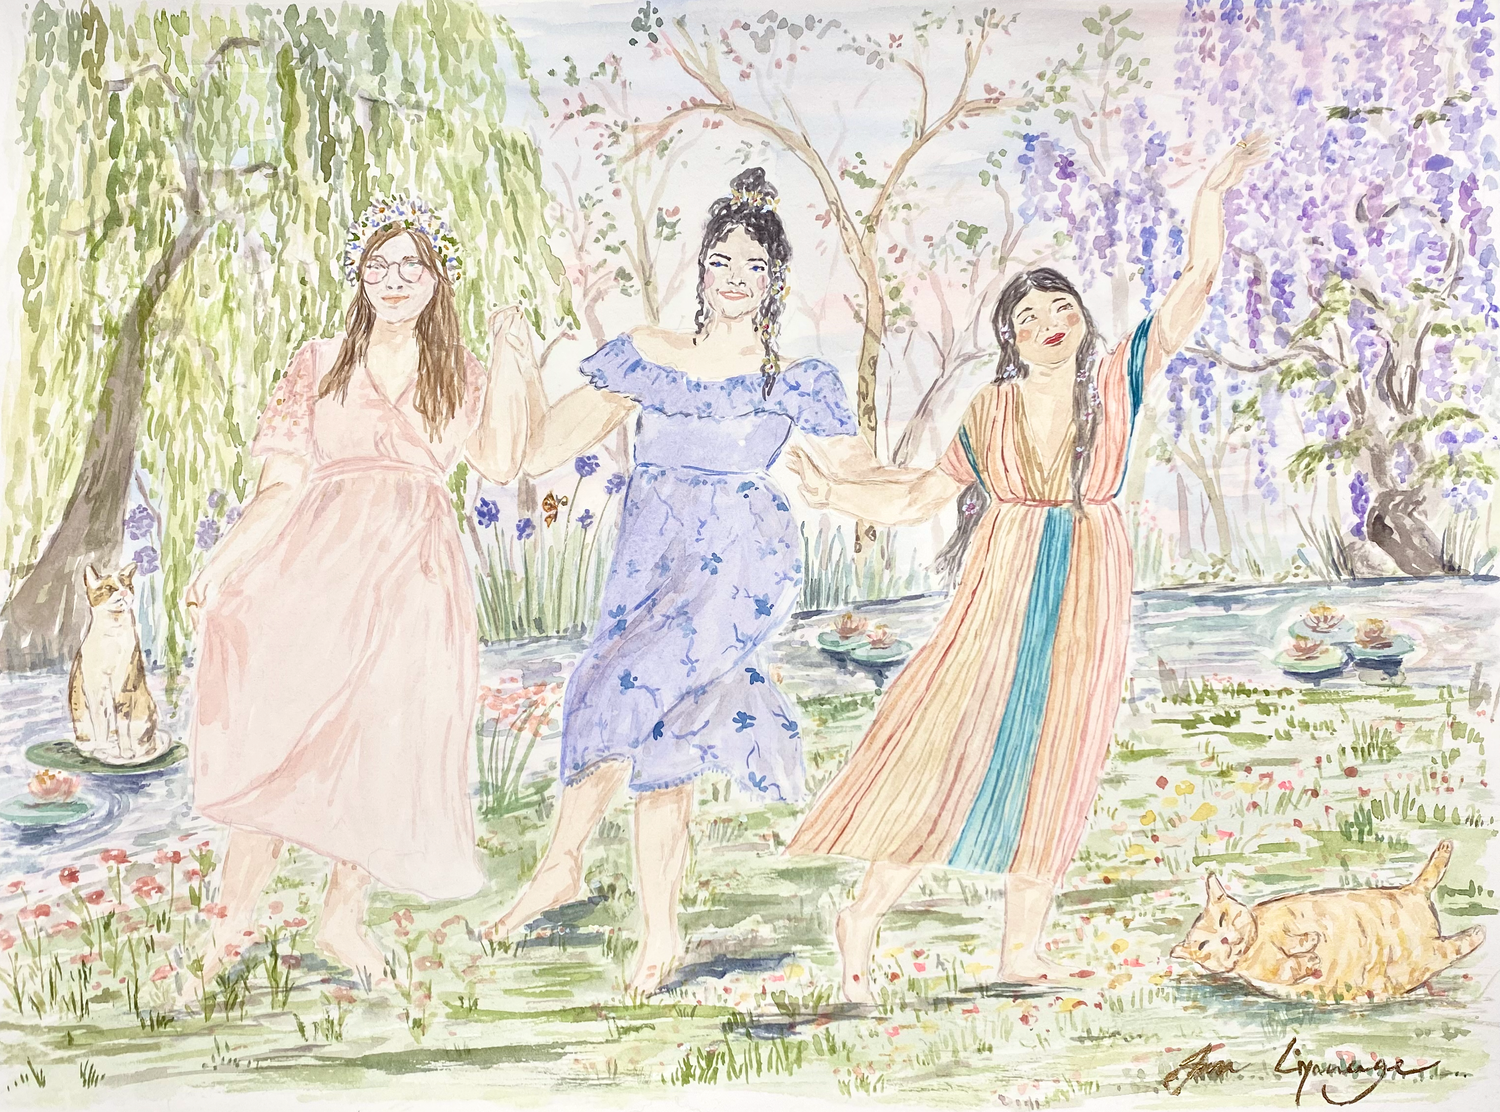 Custom watercolour painting of three friends dancing in a field of wild flowers. There are willow trees and wisteria in the background. There is a pond with water lilies behind them with their two orange cats.